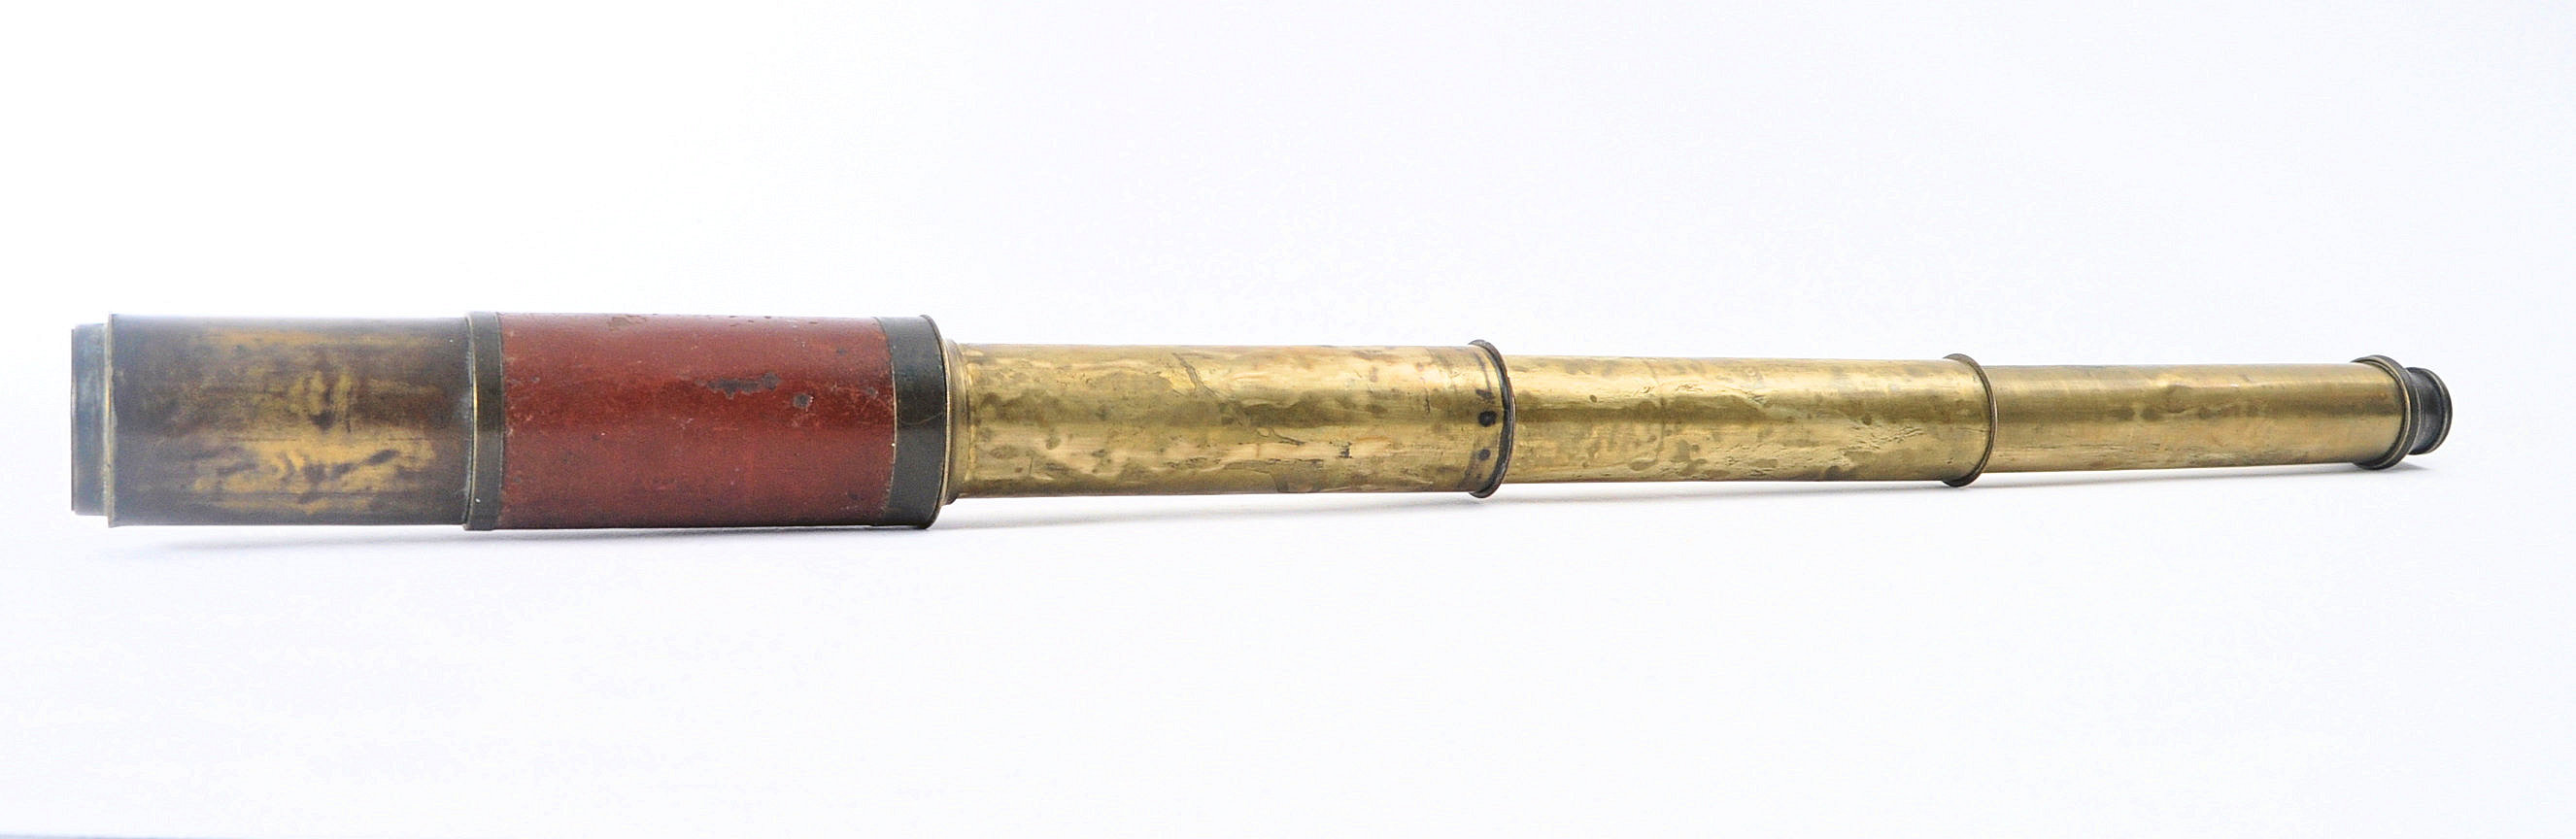 C. WEST - VICTORIAN BRASS & LEATHER EXTENDABLE TELESCOPE - Image 3 of 5